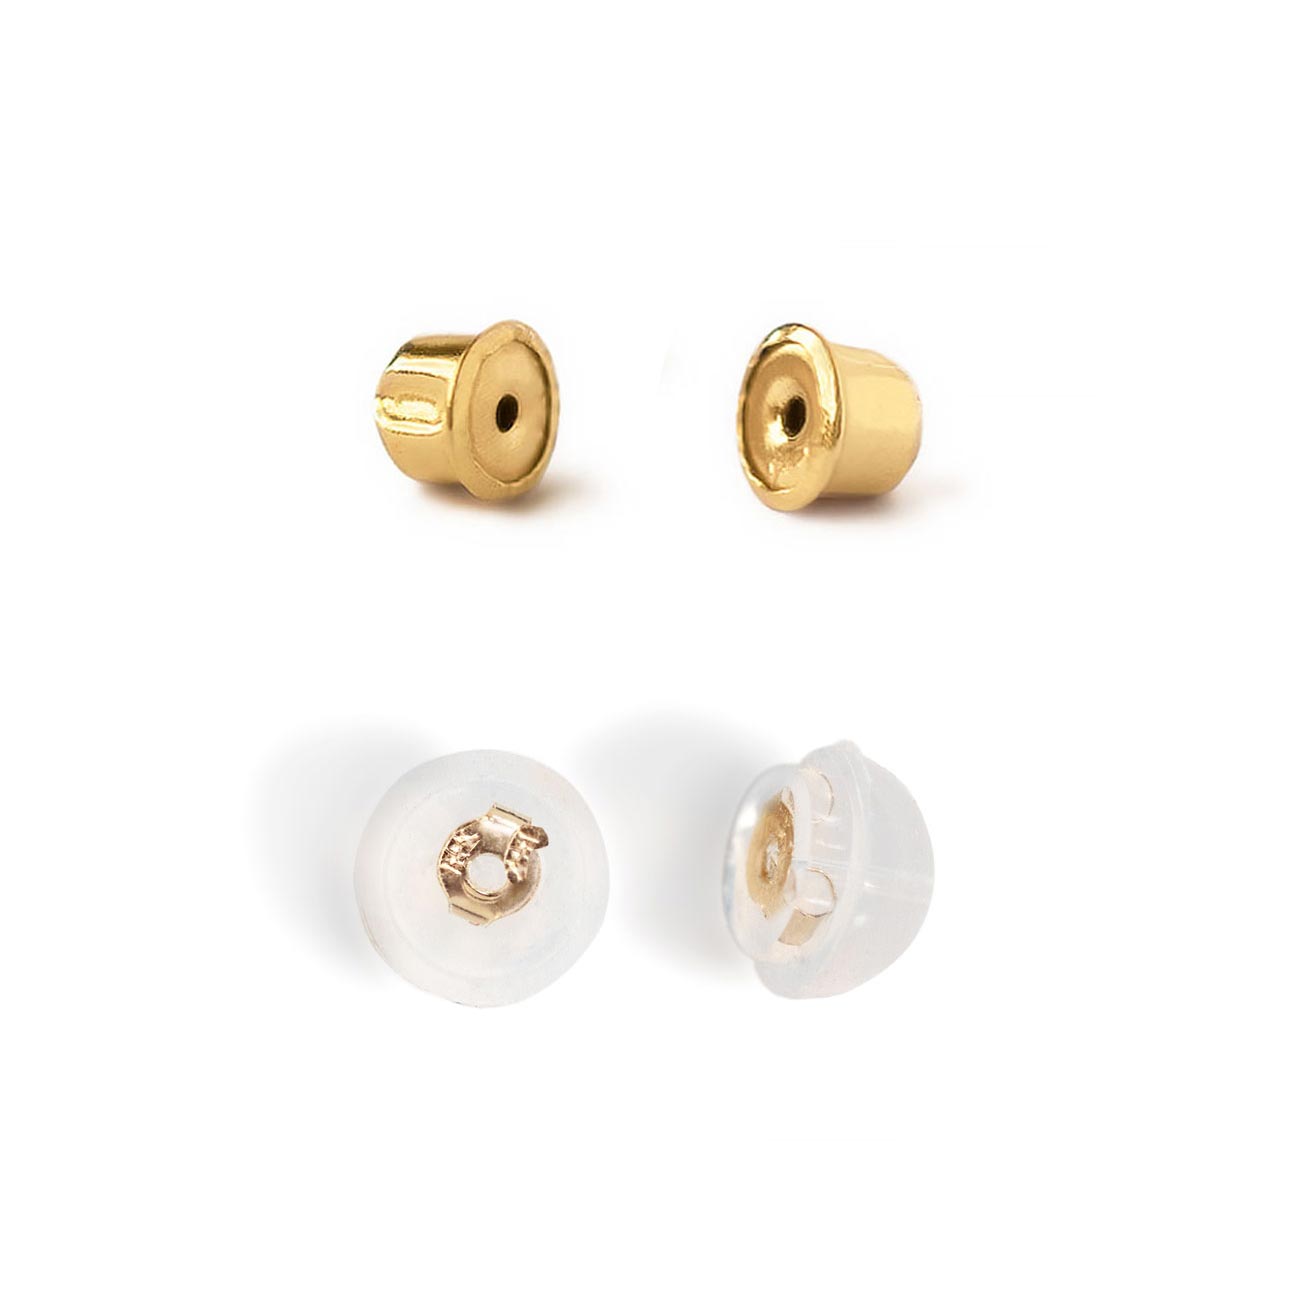 14K Real Solid Gold Silicone Push-Back, Push-Back, Screw-Back Replacements for Post Stud Earrings in 14K Real Solid Yellow Gold & White Gold